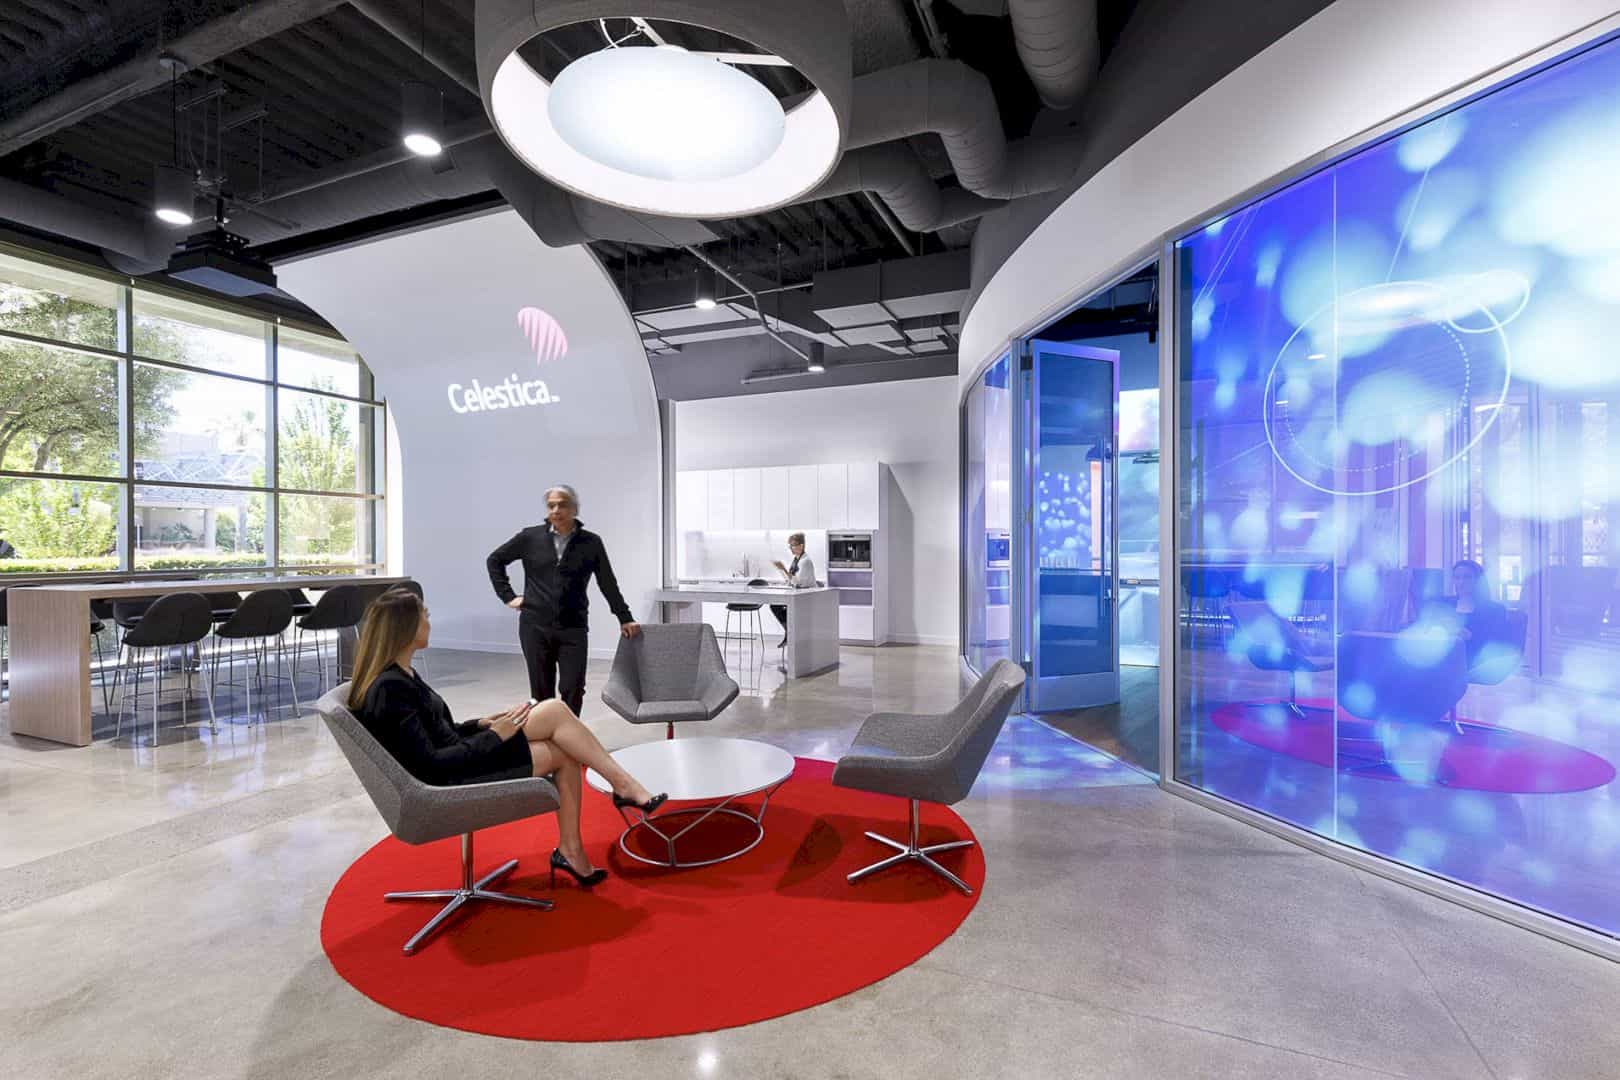 Celestica Customer Experience Center Reflecting The Celestica Story Through A Digital And Experiential Space 4